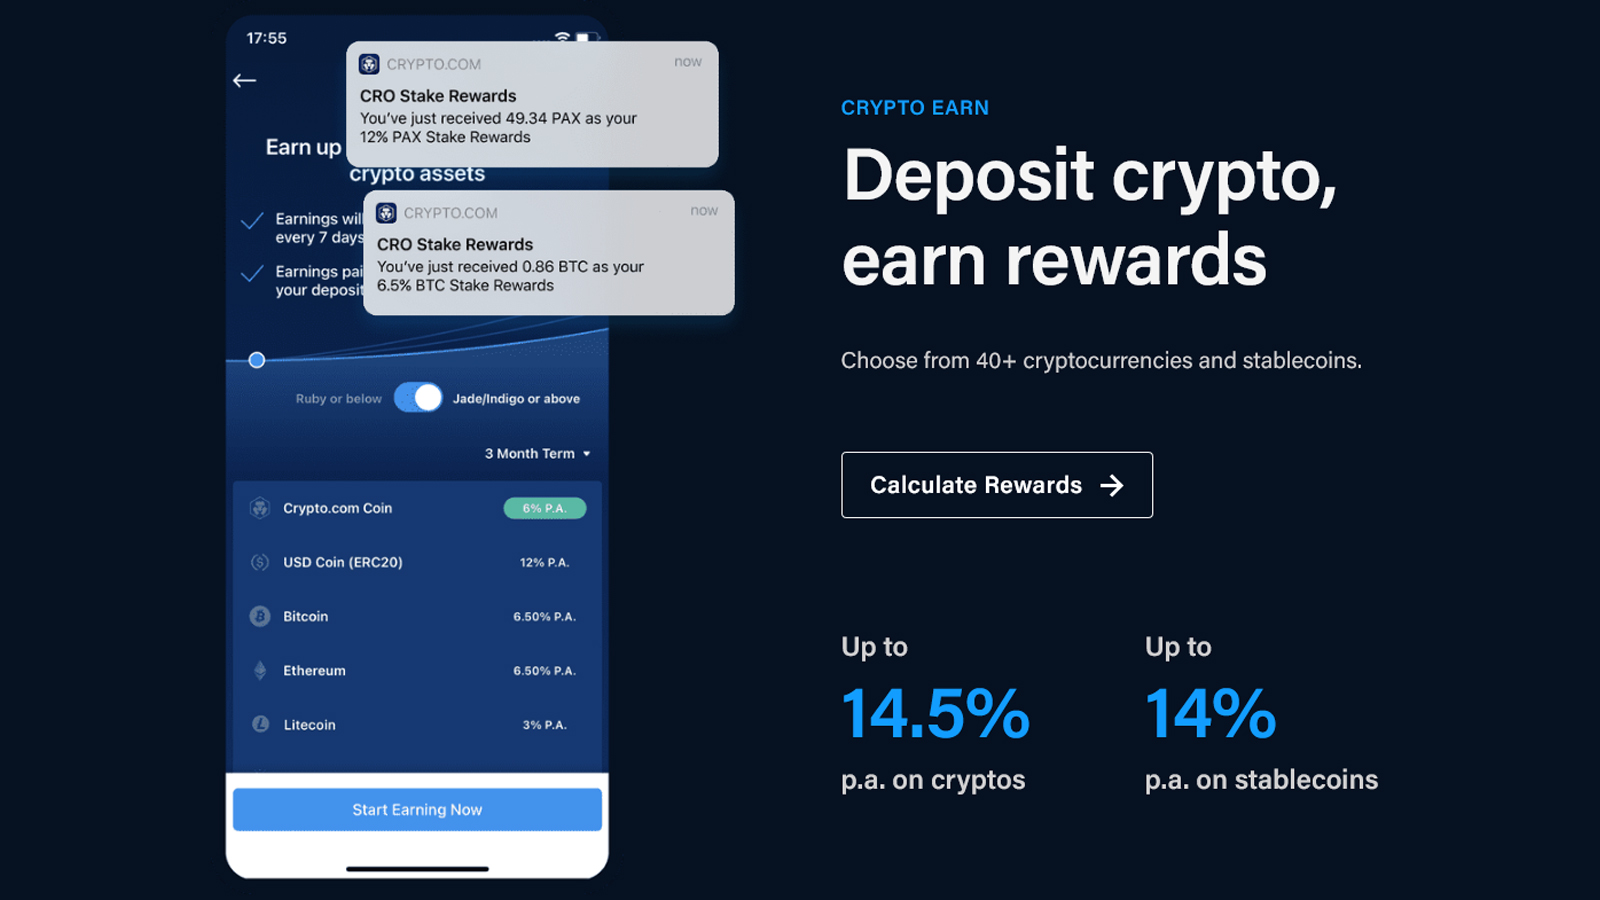 Find detailed information about Crypto.com